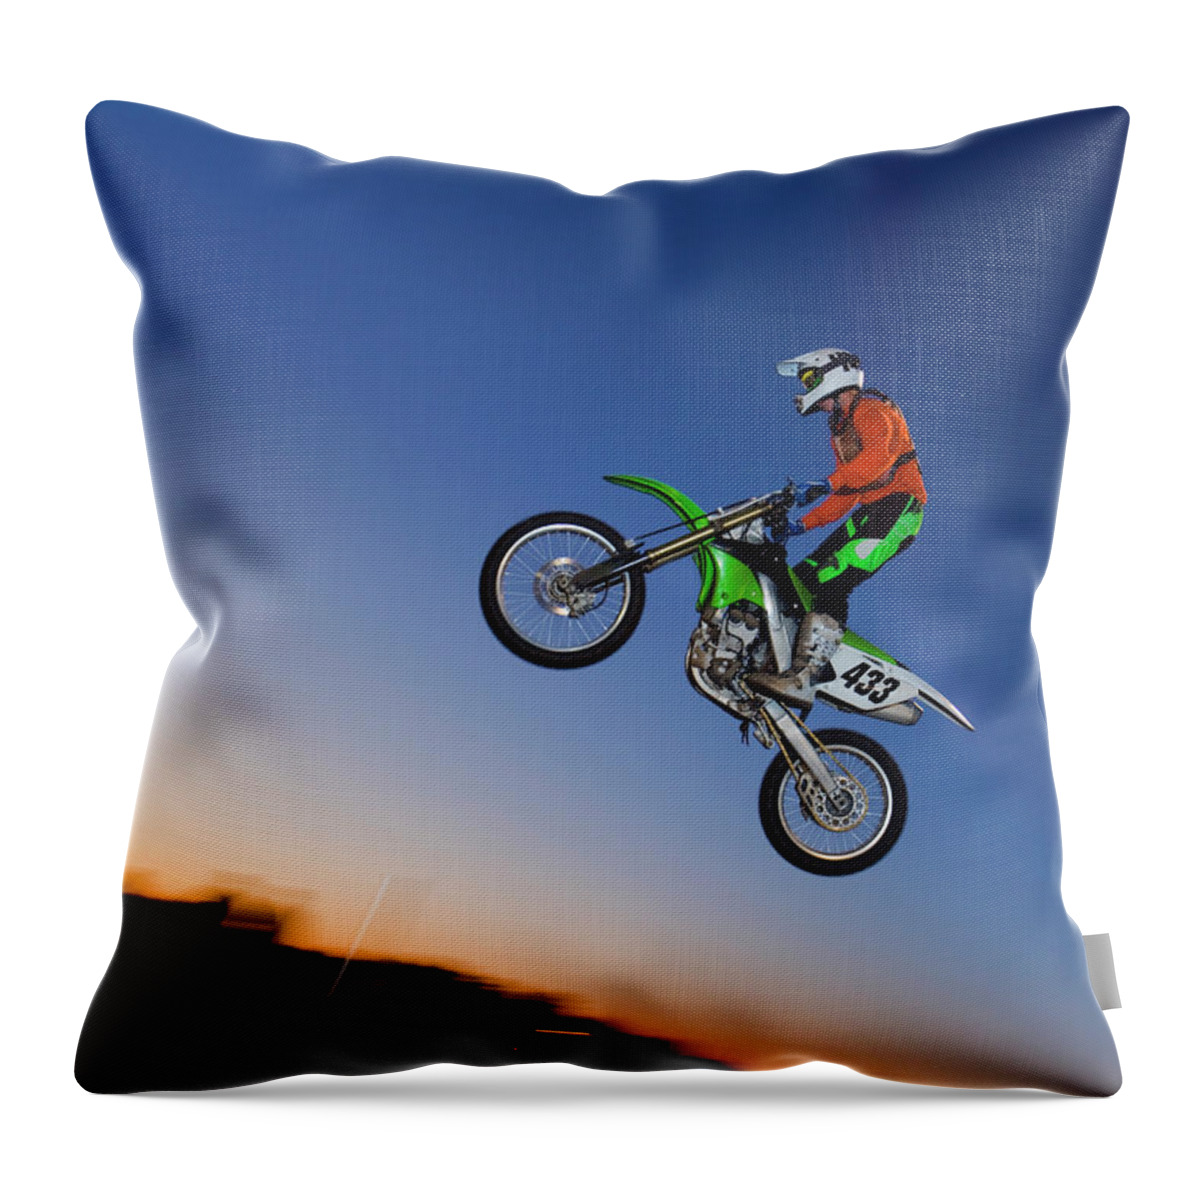 Dawn Throw Pillow featuring the photograph Motorcross Rider Jumping Dirt Bike by Jupiterimages